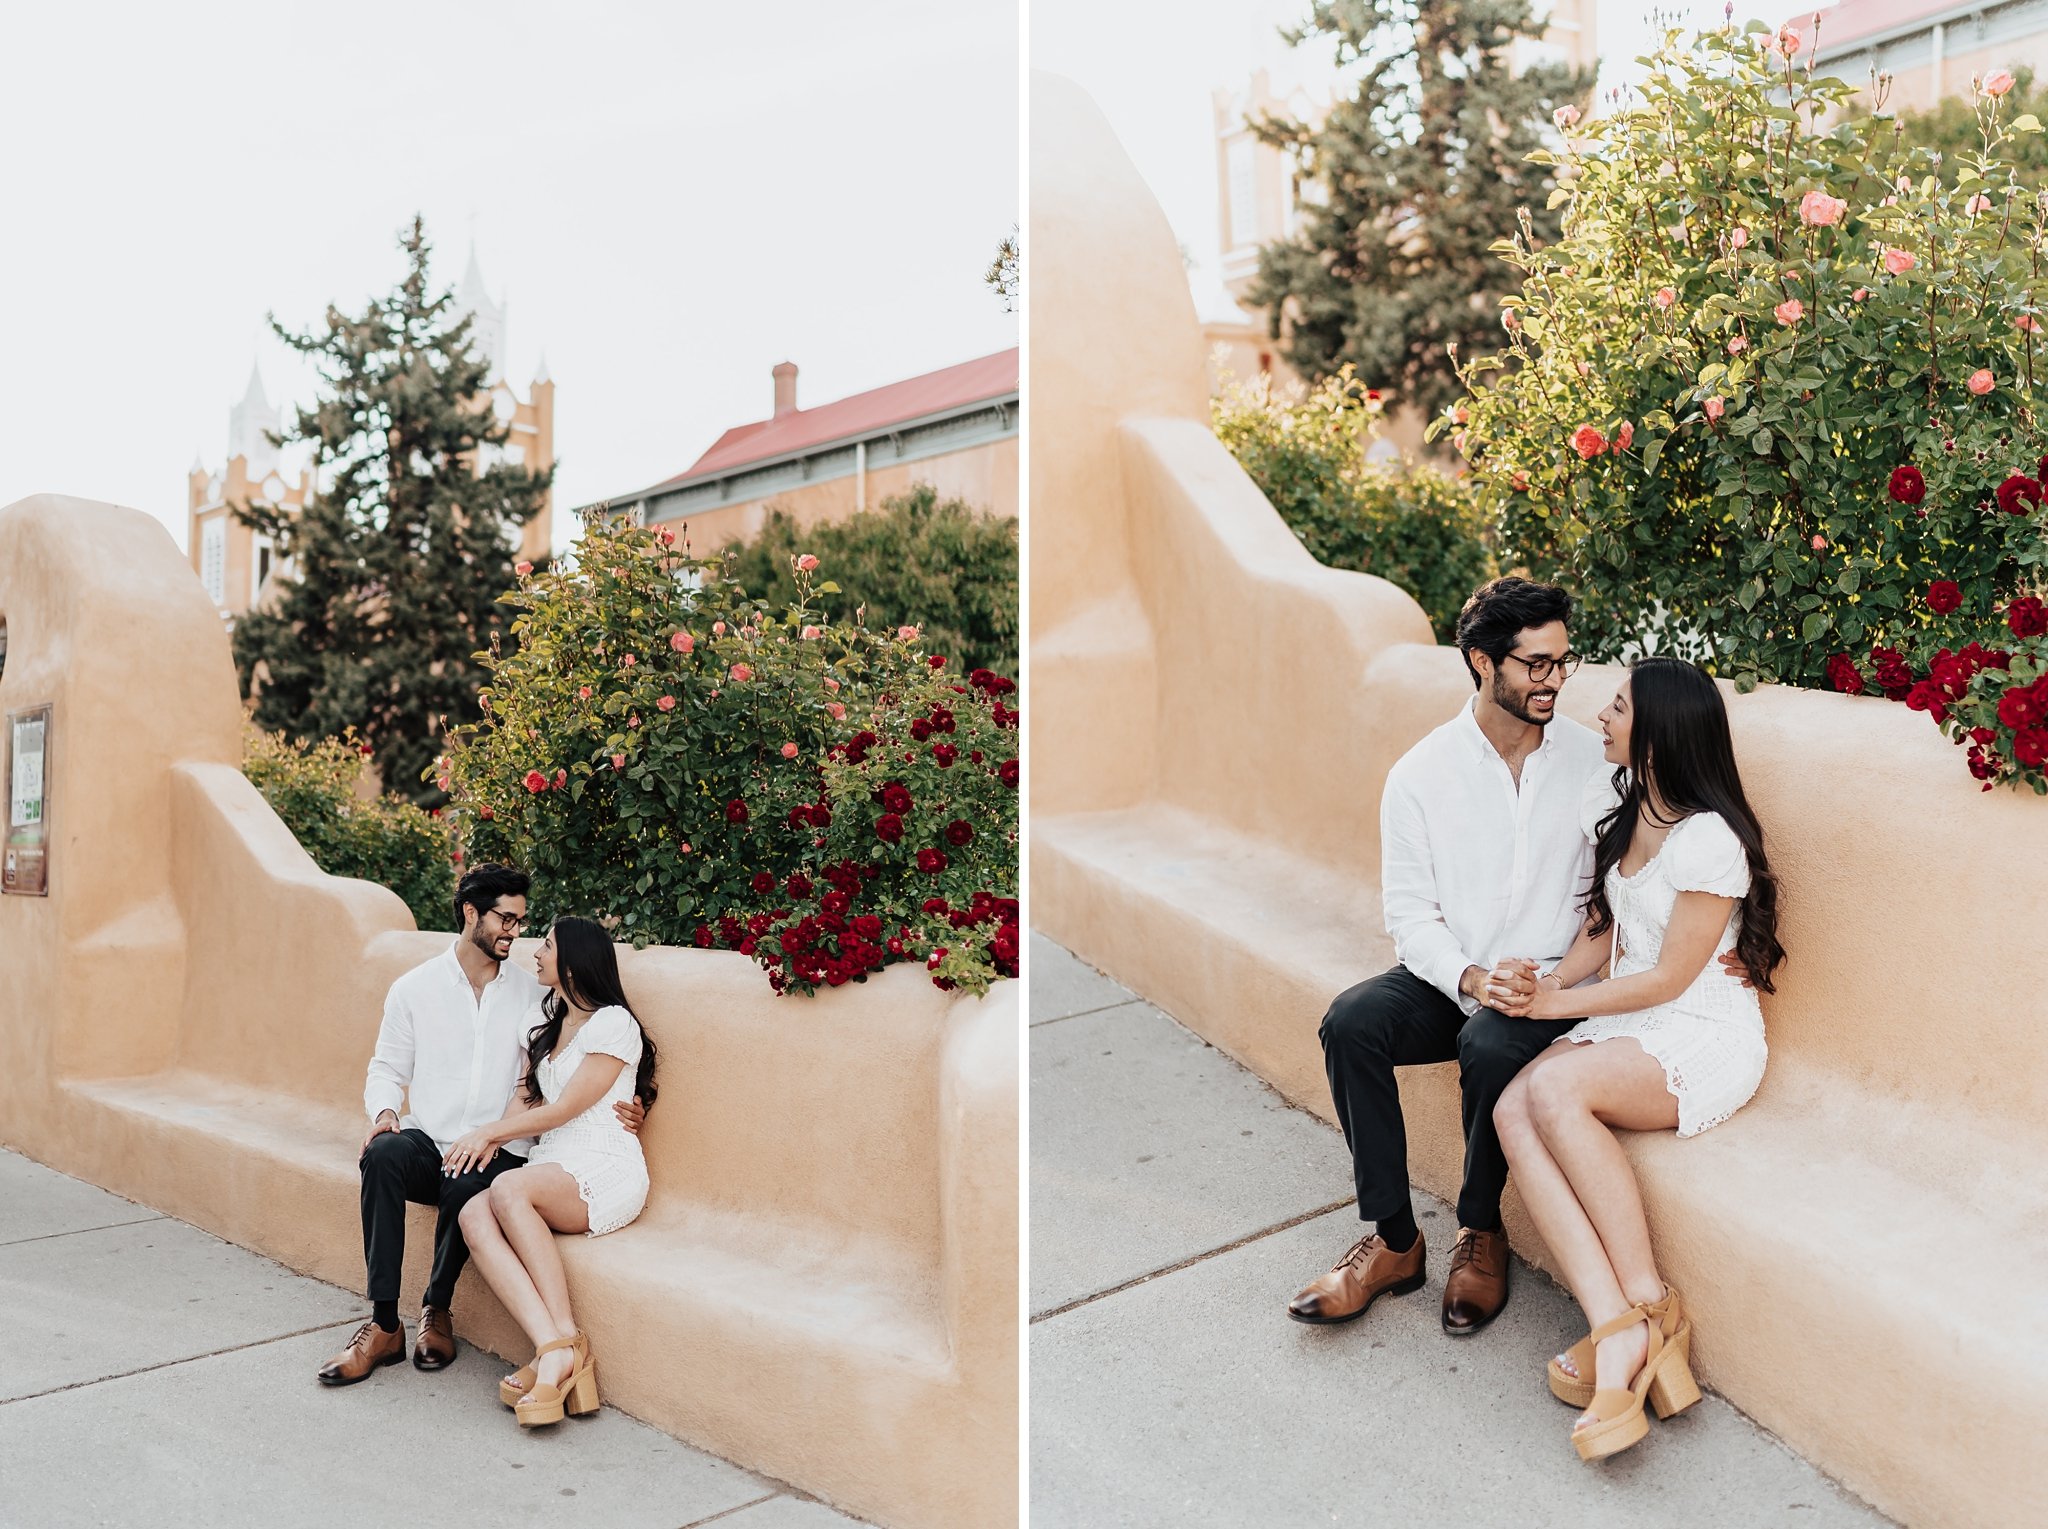 Alicia+lucia+photography+-+albuquerque+wedding+photographer+-+santa+fe+wedding+photography+-+new+mexico+wedding+photographer+-+new+mexico+wedding+-+old+town+engagement+-+old+town+wedding+-+southwest+engagement_0012.jpg